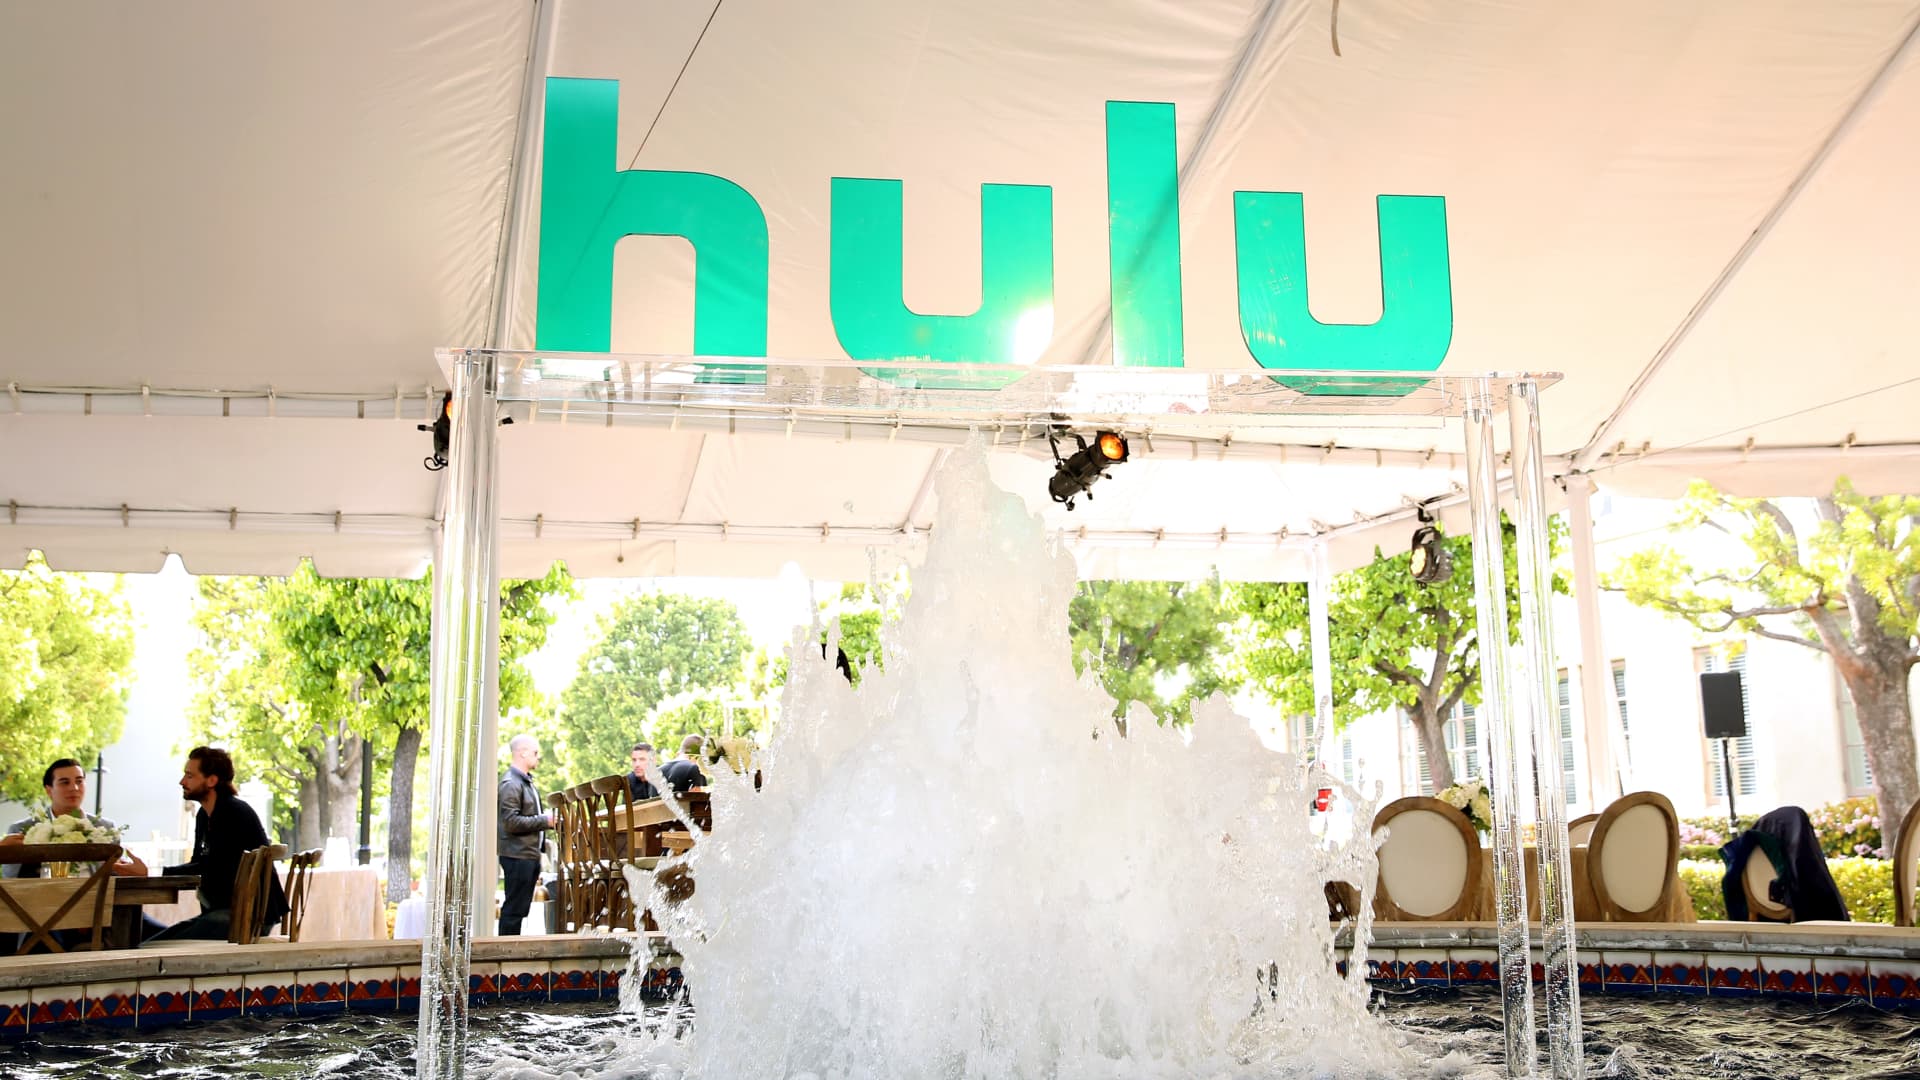 Hulu is facing an existential crisis when Disney decides how to proceed